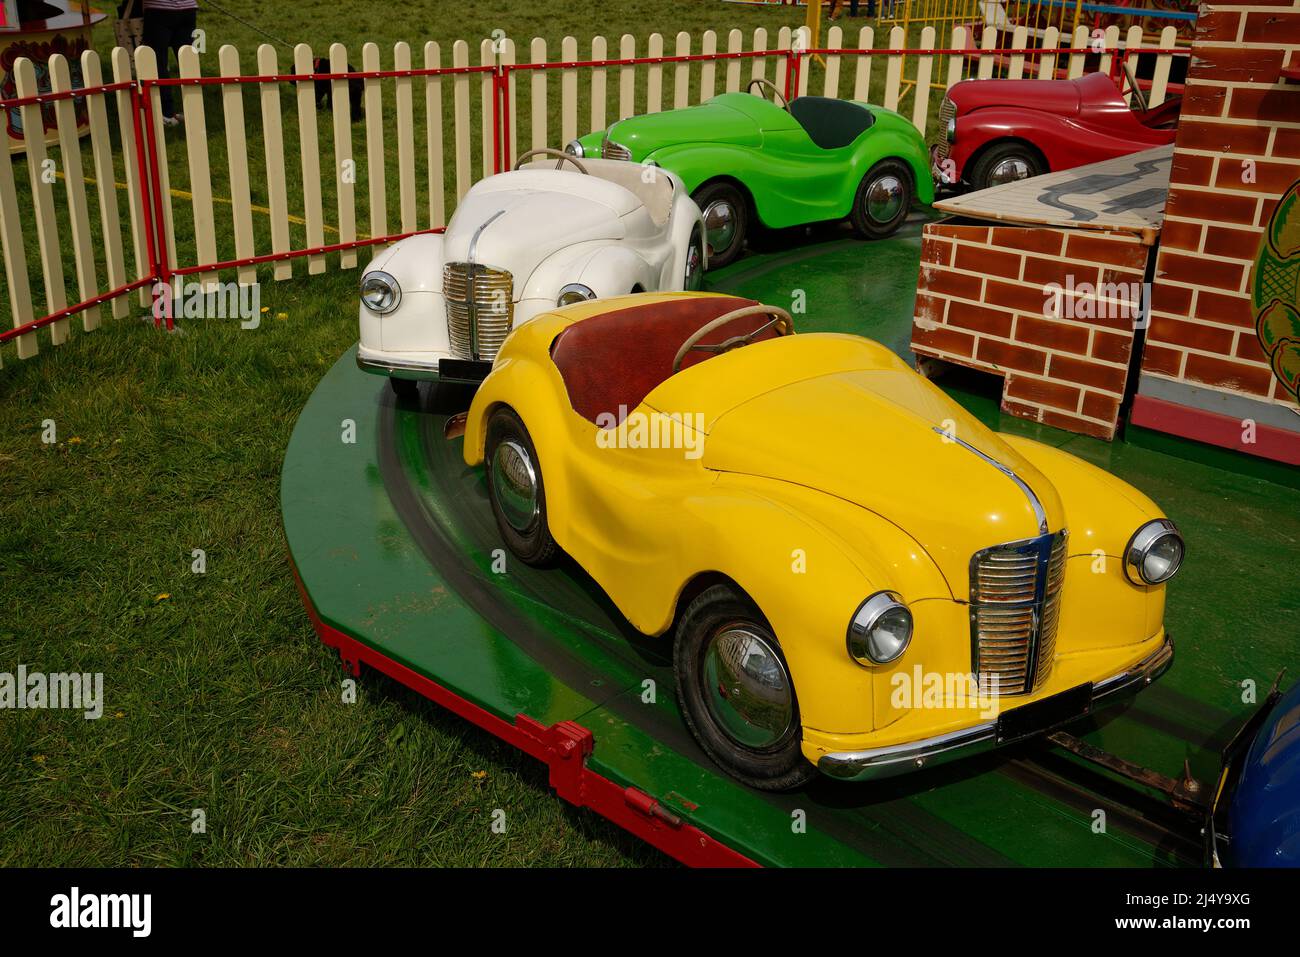 A fairground ride for children. Small 'cars' to steer and pretend to drive. Stock Photo